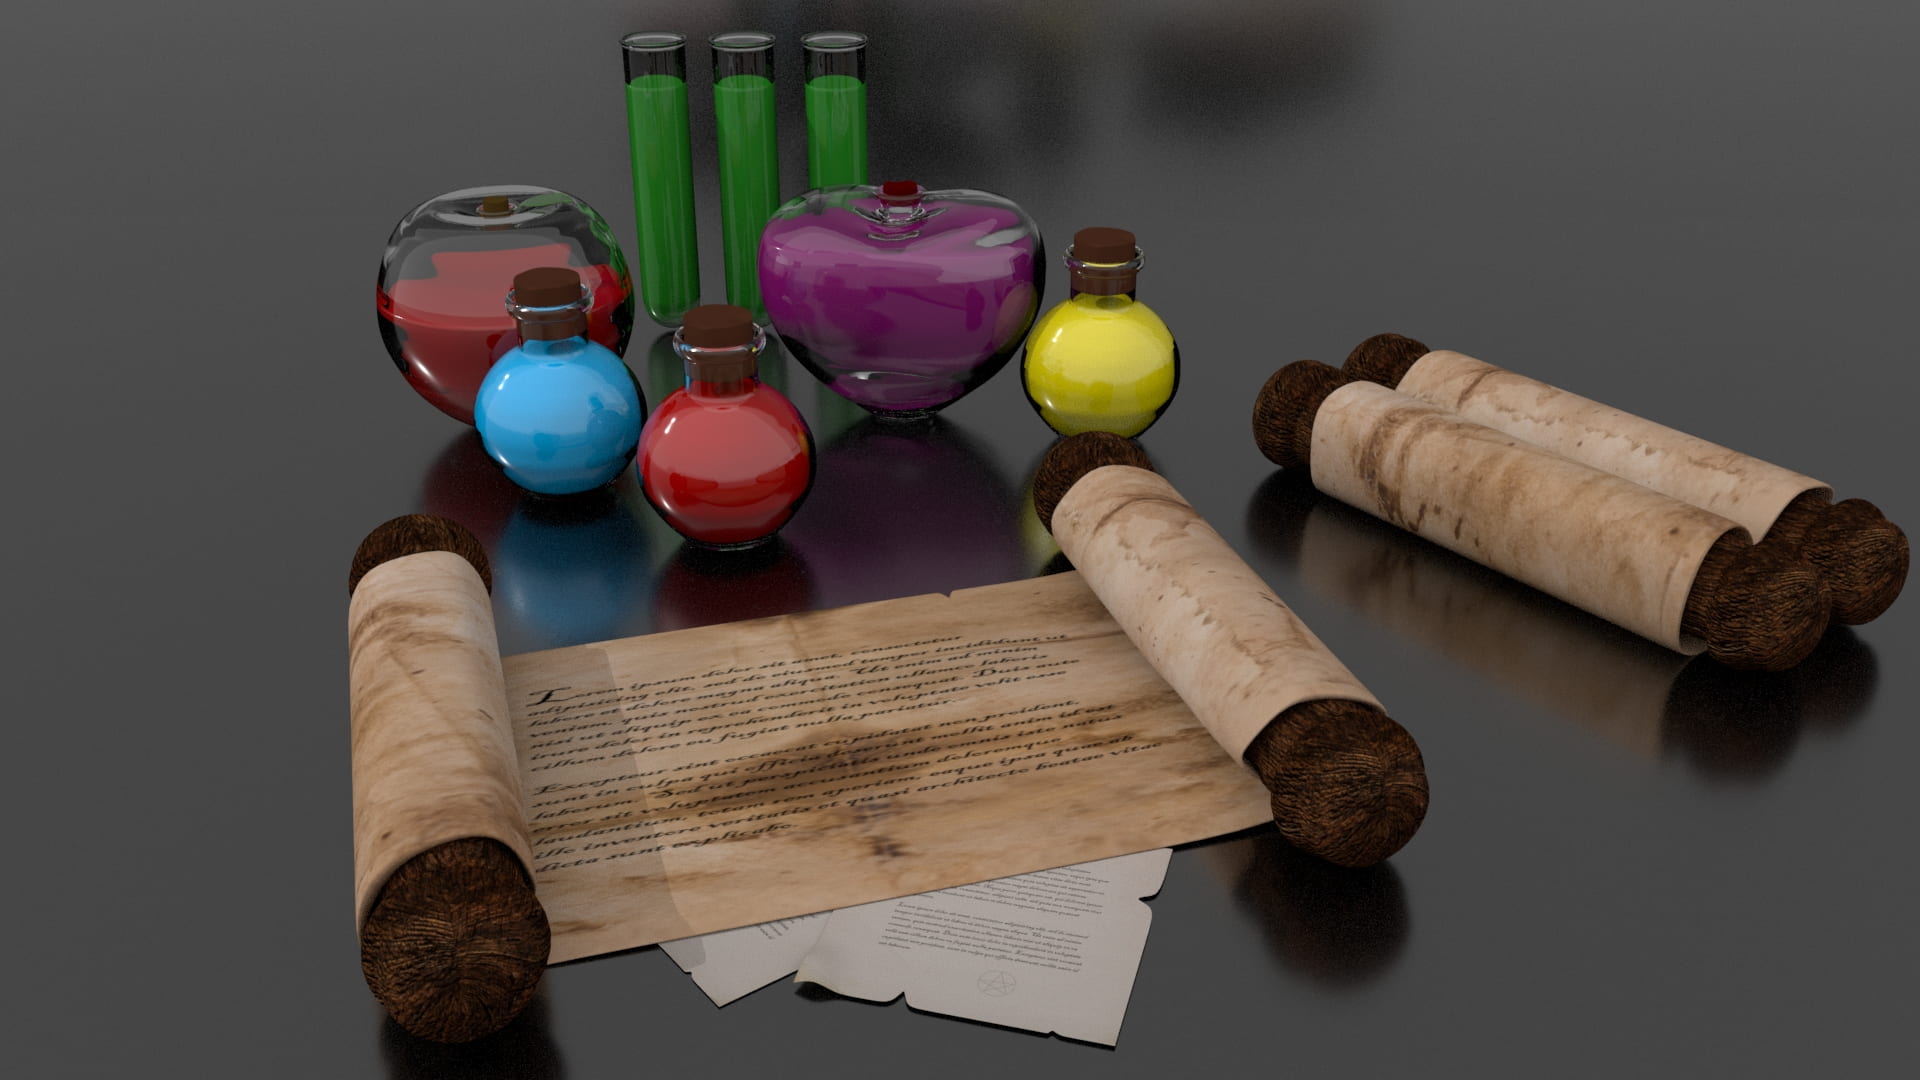 A number of different shaped bottles containing various coloured liquids and a scroll on brown paper.